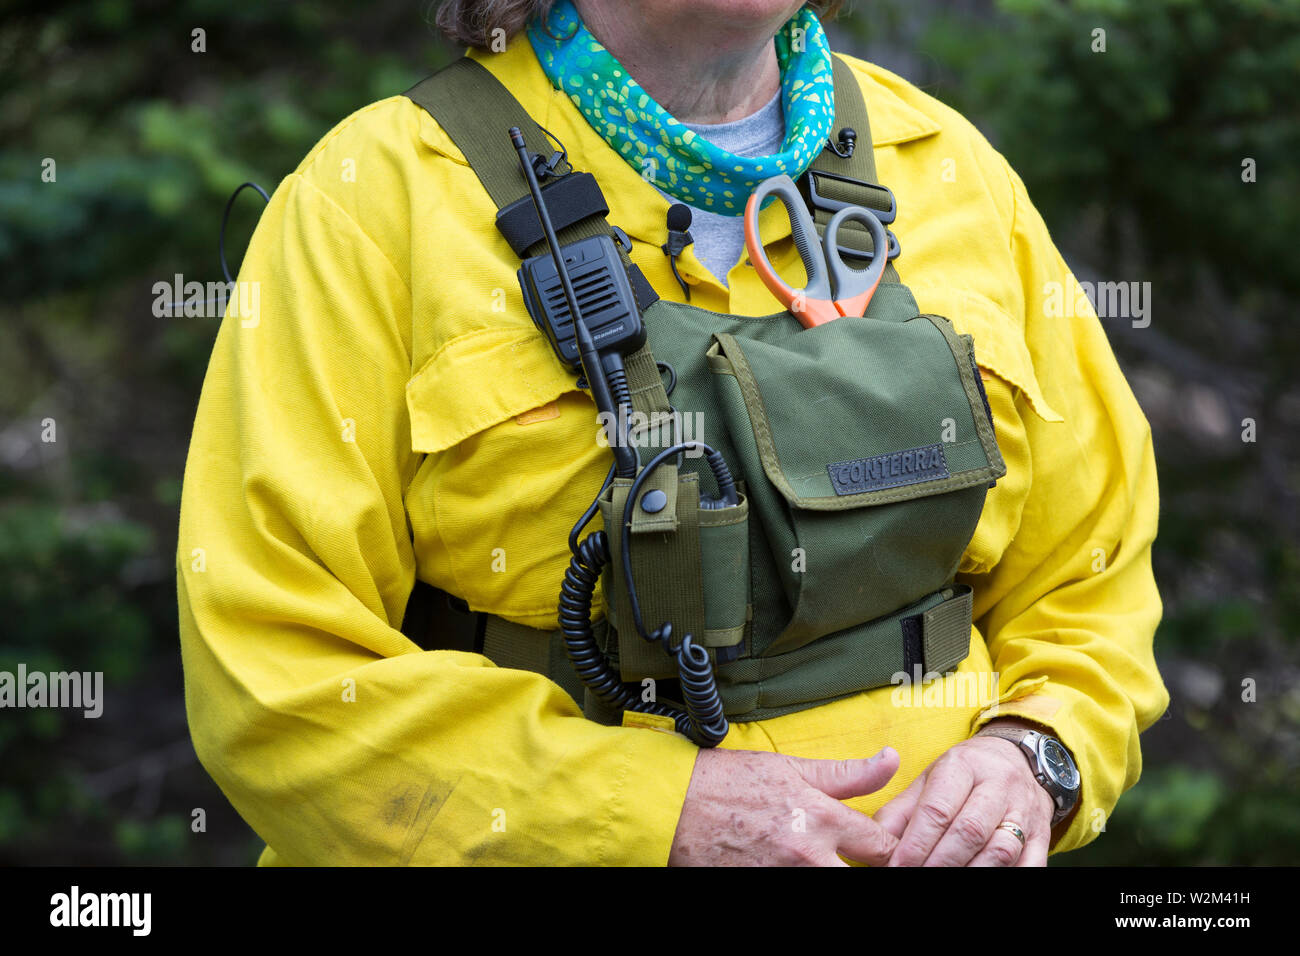 Patti Happe, wildlife biologist with the National Park Service, speaks to members of the media at Hurricane Ridge in Olympic National Park, Washington on July 9, 2019. Today is the second day of a two-week long capture and translocation process moving mountain goats from Olympic National Park to the northern Cascade Mountains. The effort is a collaboration between the National Park Service, the Washington Department of Fish & Wildlife and the USDA Forest Service to re-establish depleted populations of mountain goats in the Northern Cascades while also removing non-native goats from the Olympic Stock Photo